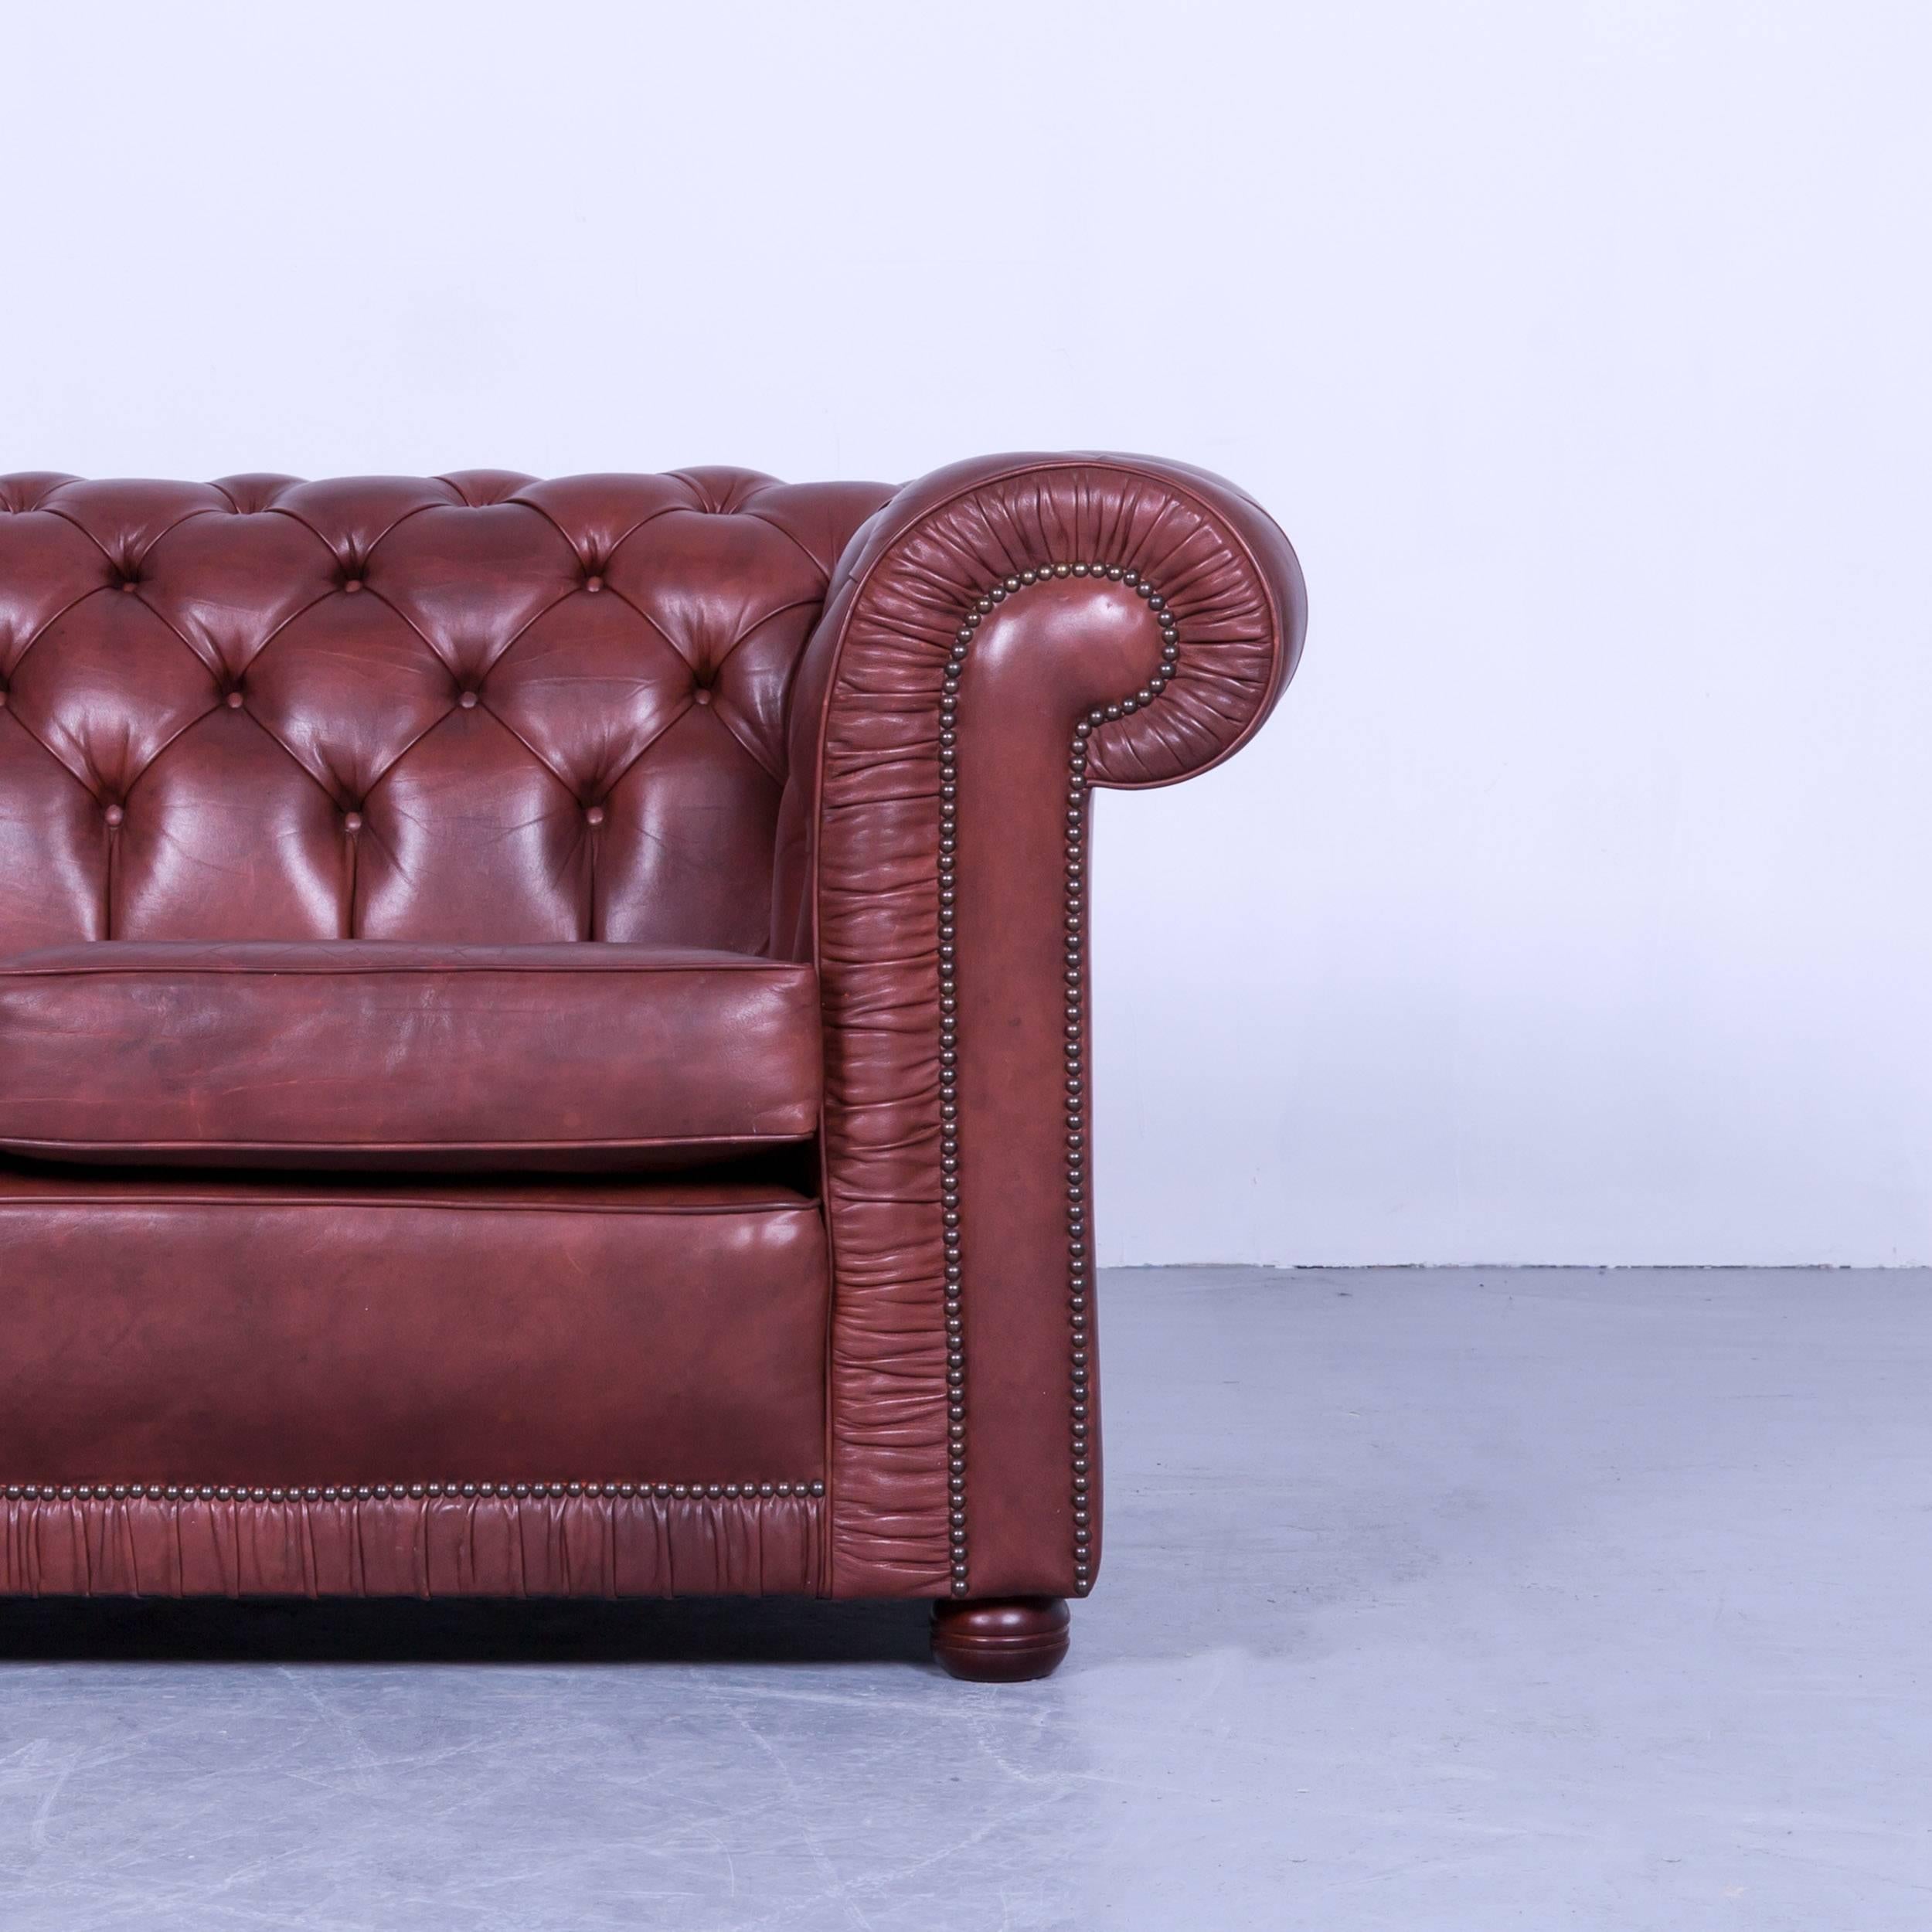 Leather Chesterfield Sofa Set Three-Seat and Two-Seat Sofa Red Brown Vintage Rivets